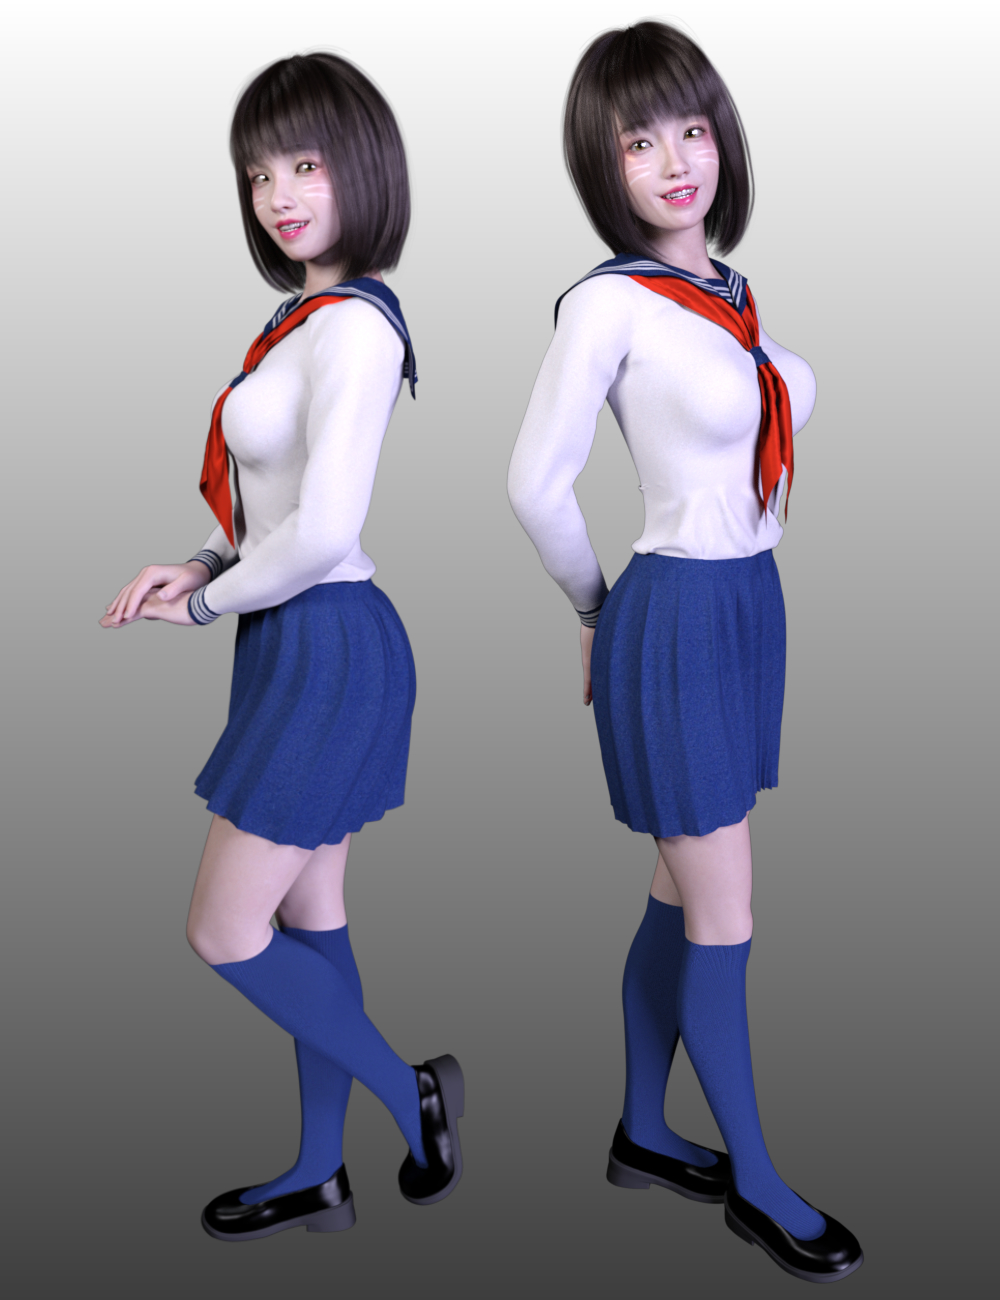 FG Poses for Japanese Style Room by: IronmanFugazi1968, 3D Models by Daz 3D